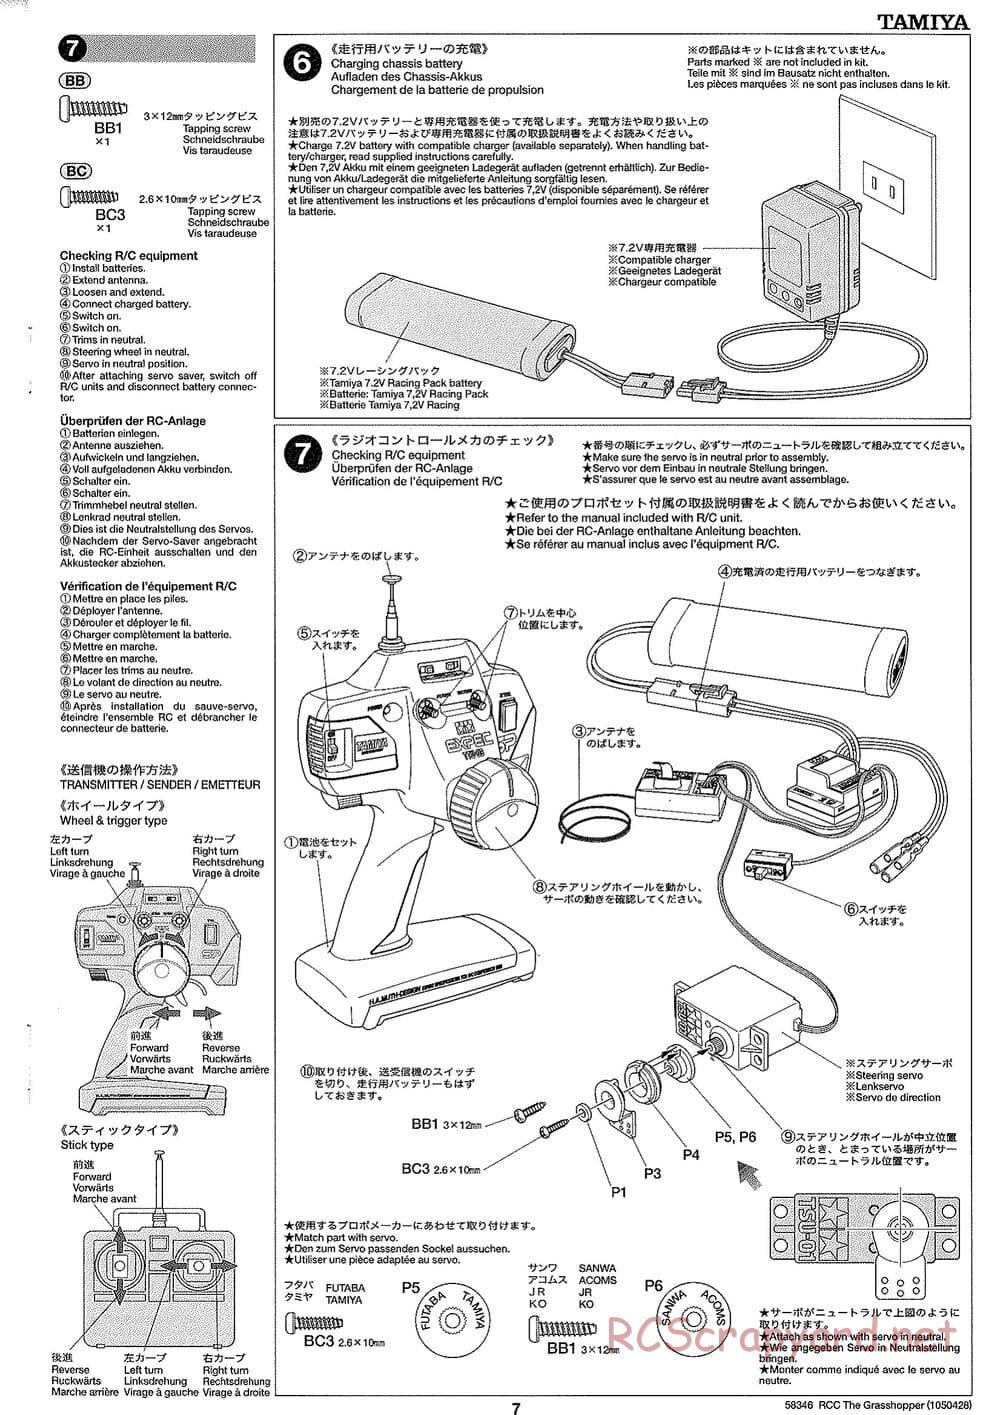 Tamiya - The Grasshopper (2005) - GH Chassis - Manual - Page 7